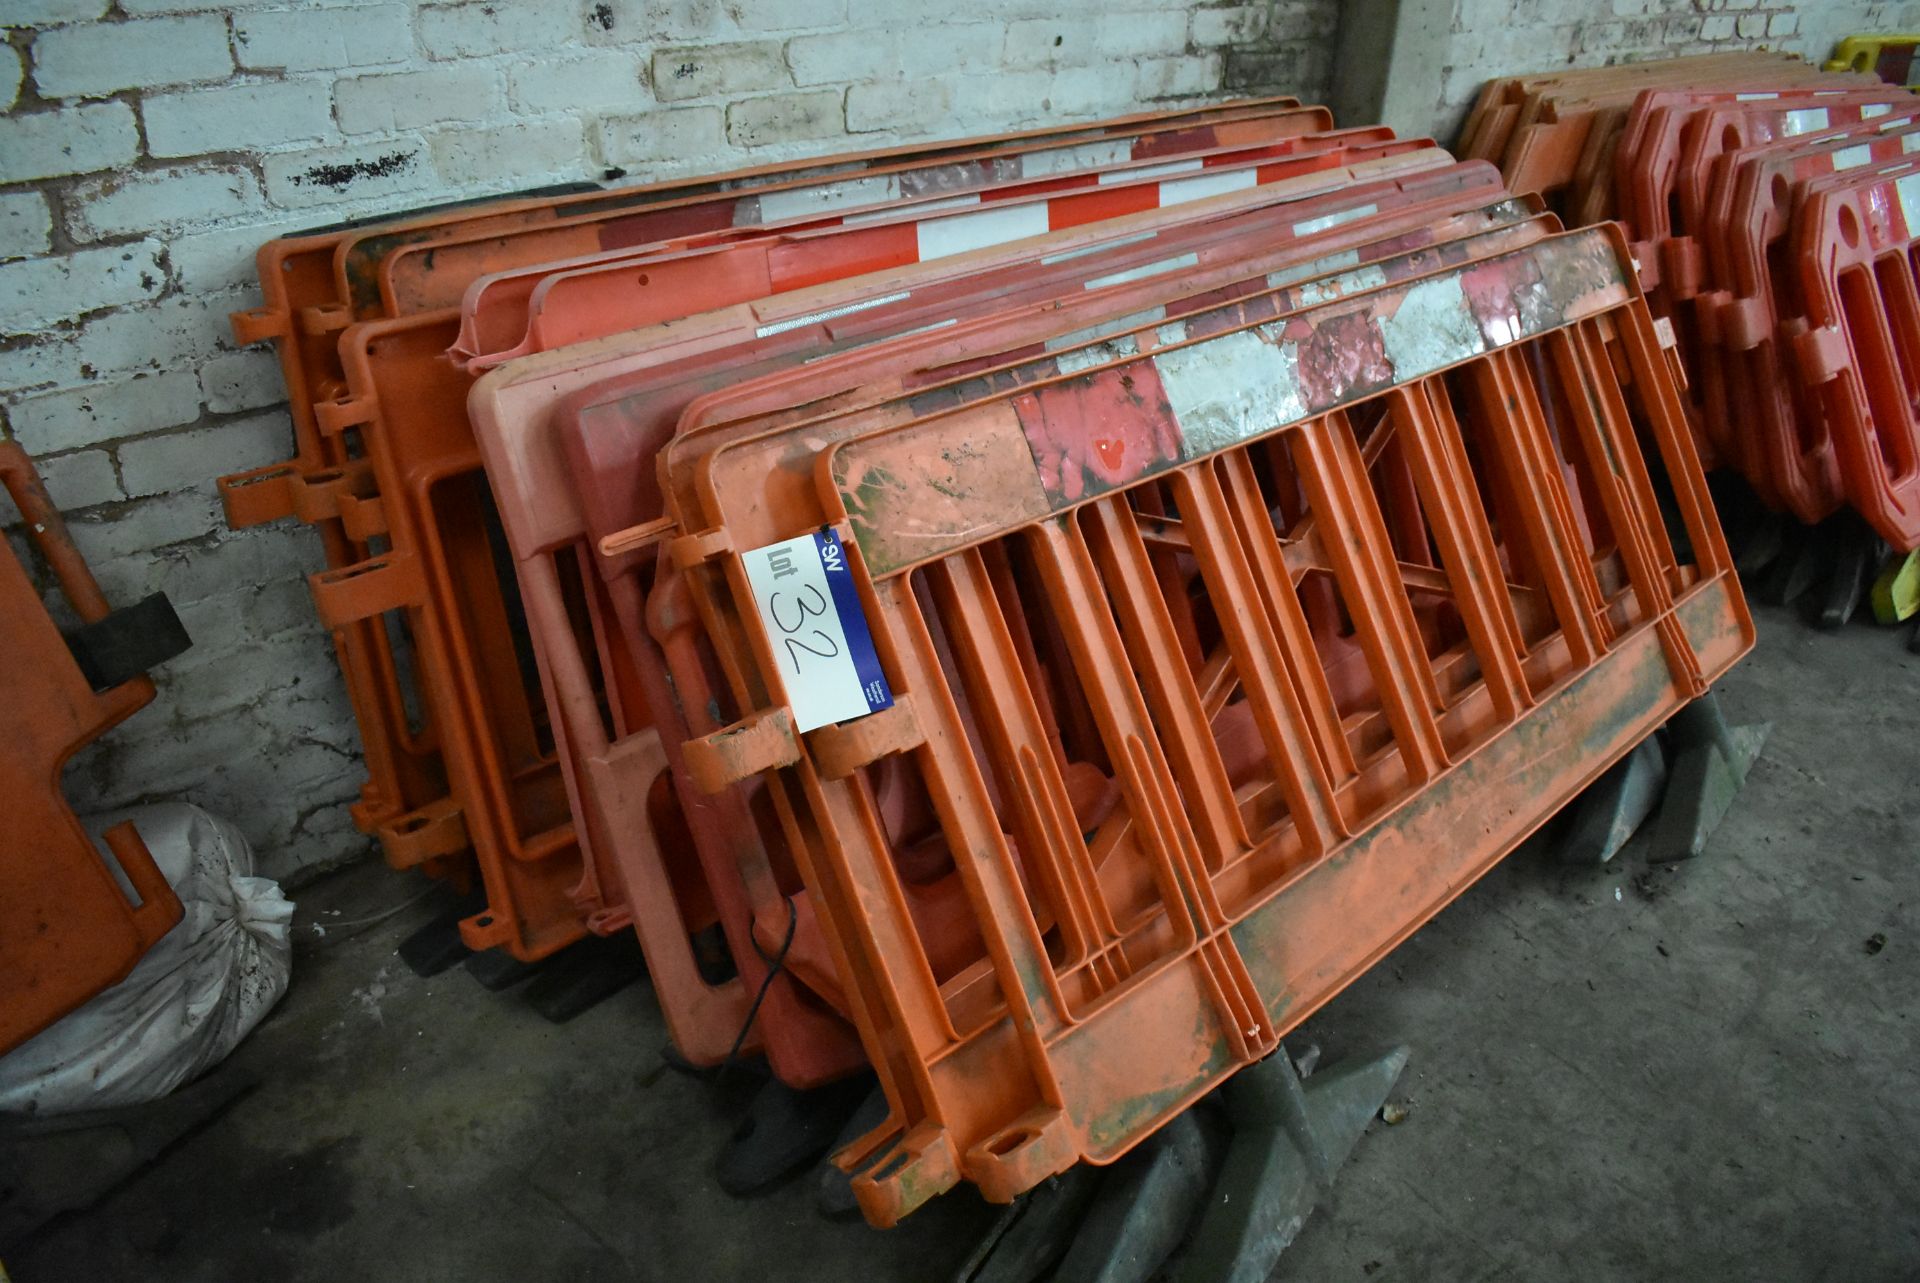 Approx. 13 Assorted Plastic Barriers, up to approx. 1.9m long